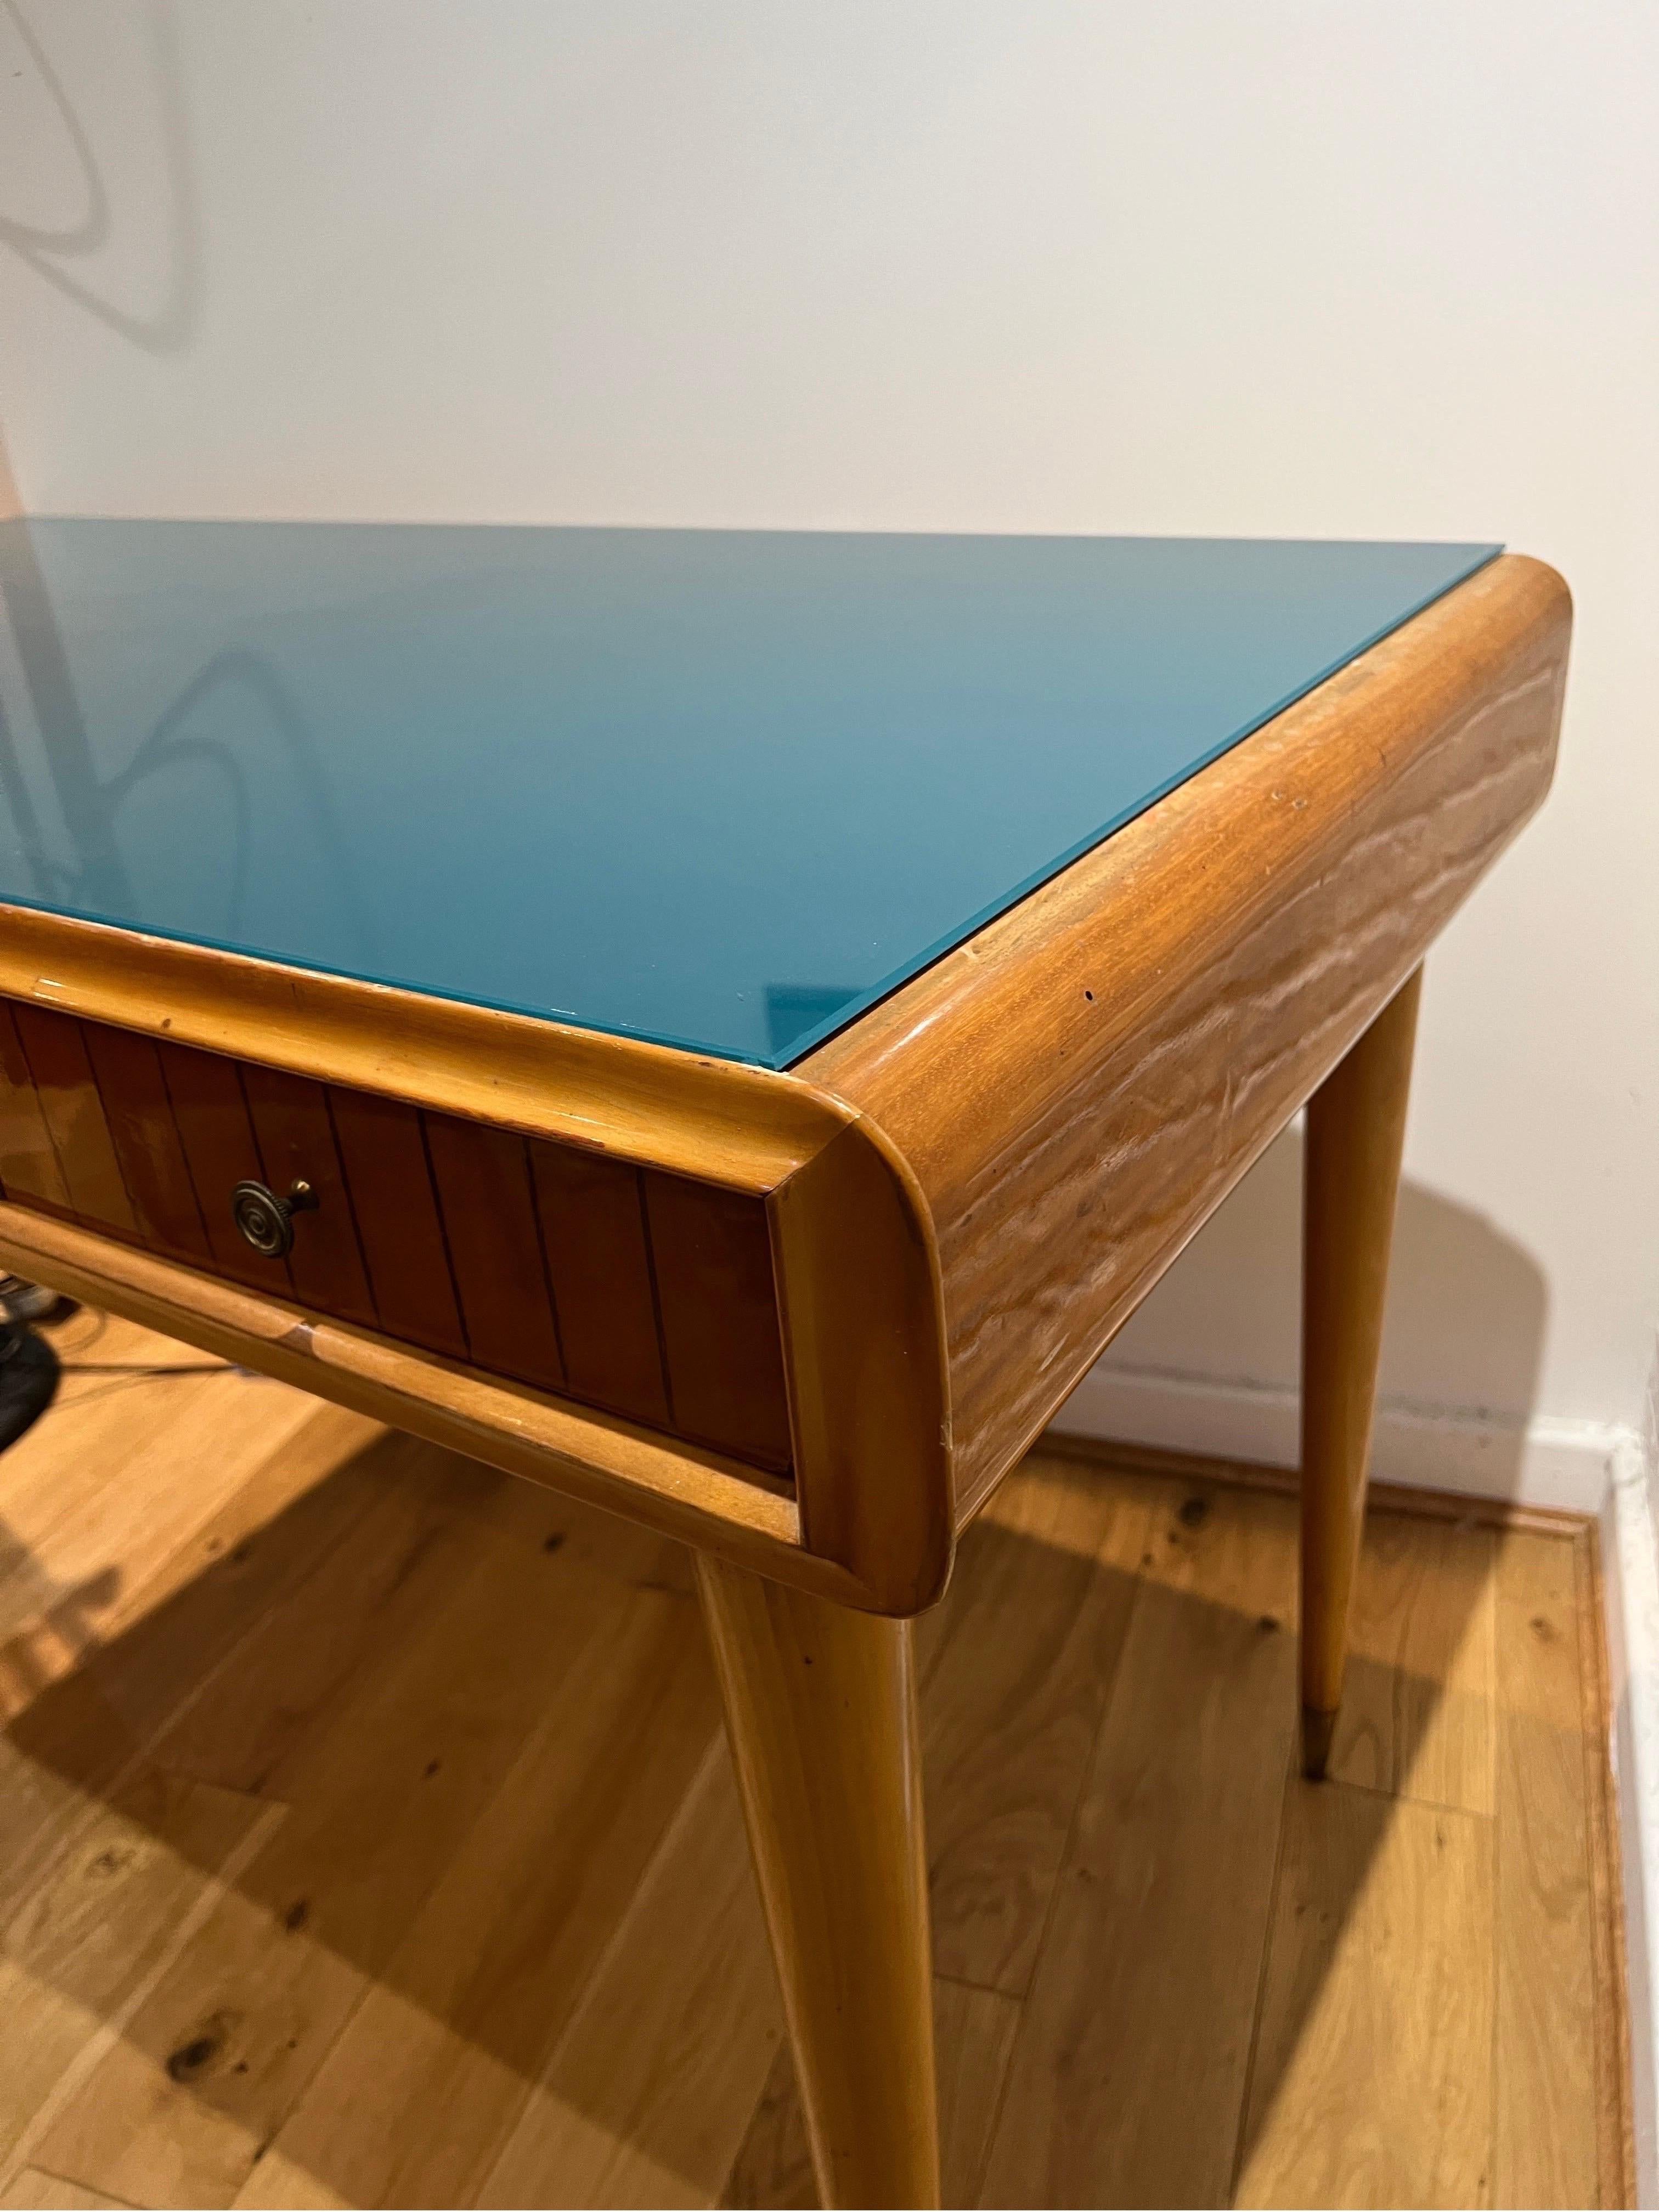 Brass Small desk/ vanity table with blue glass top 